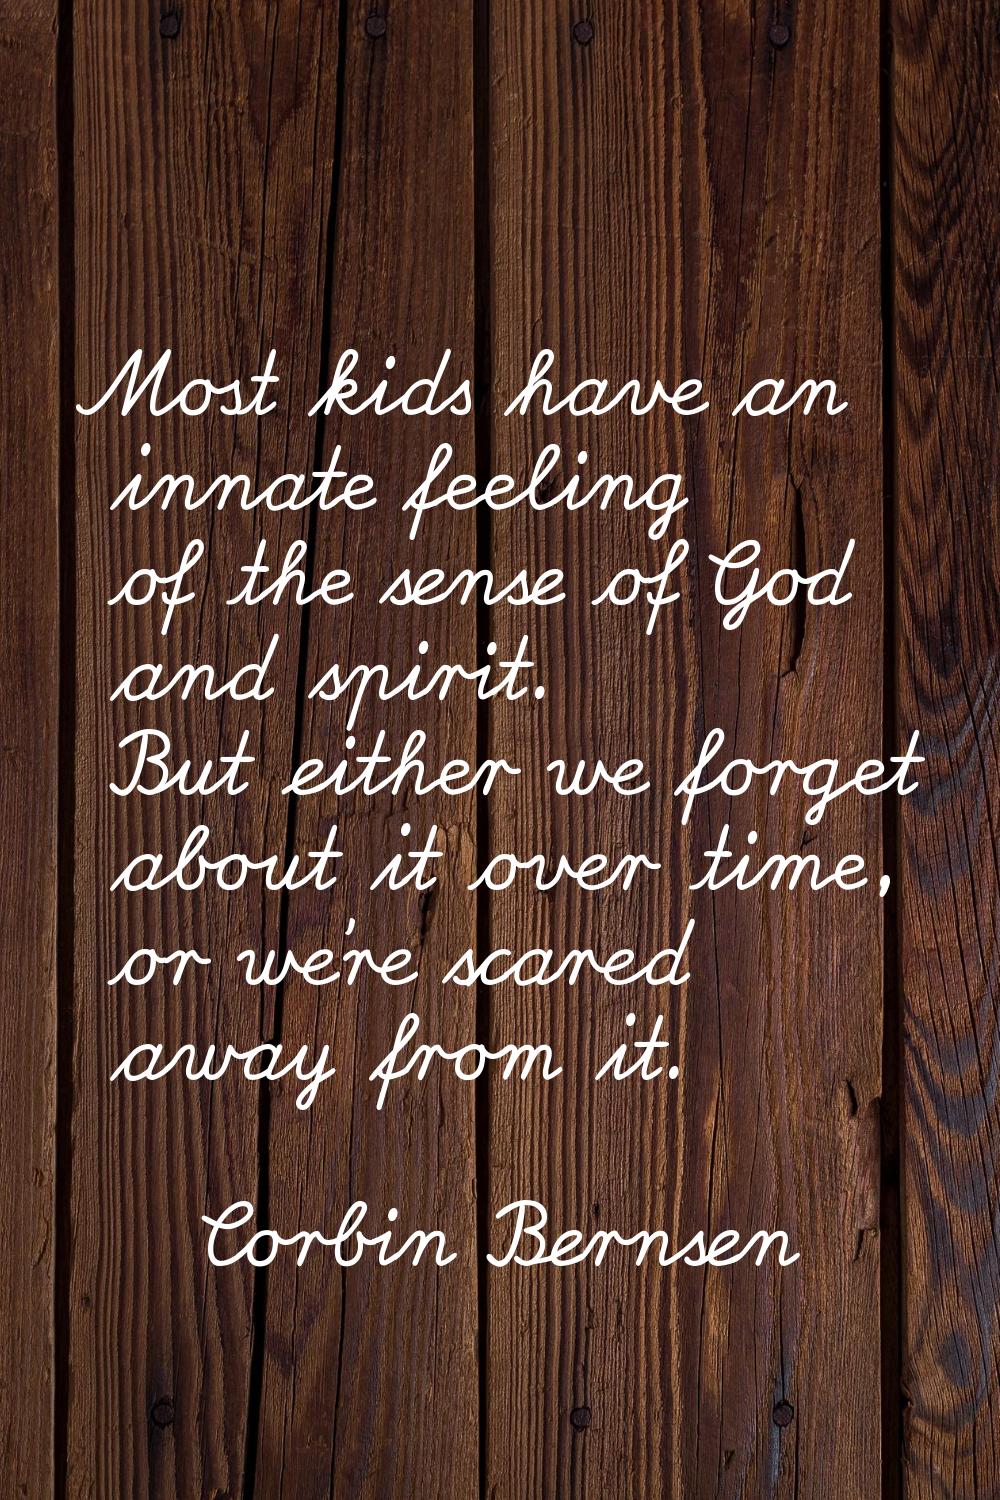 Most kids have an innate feeling of the sense of God and spirit. But either we forget about it over